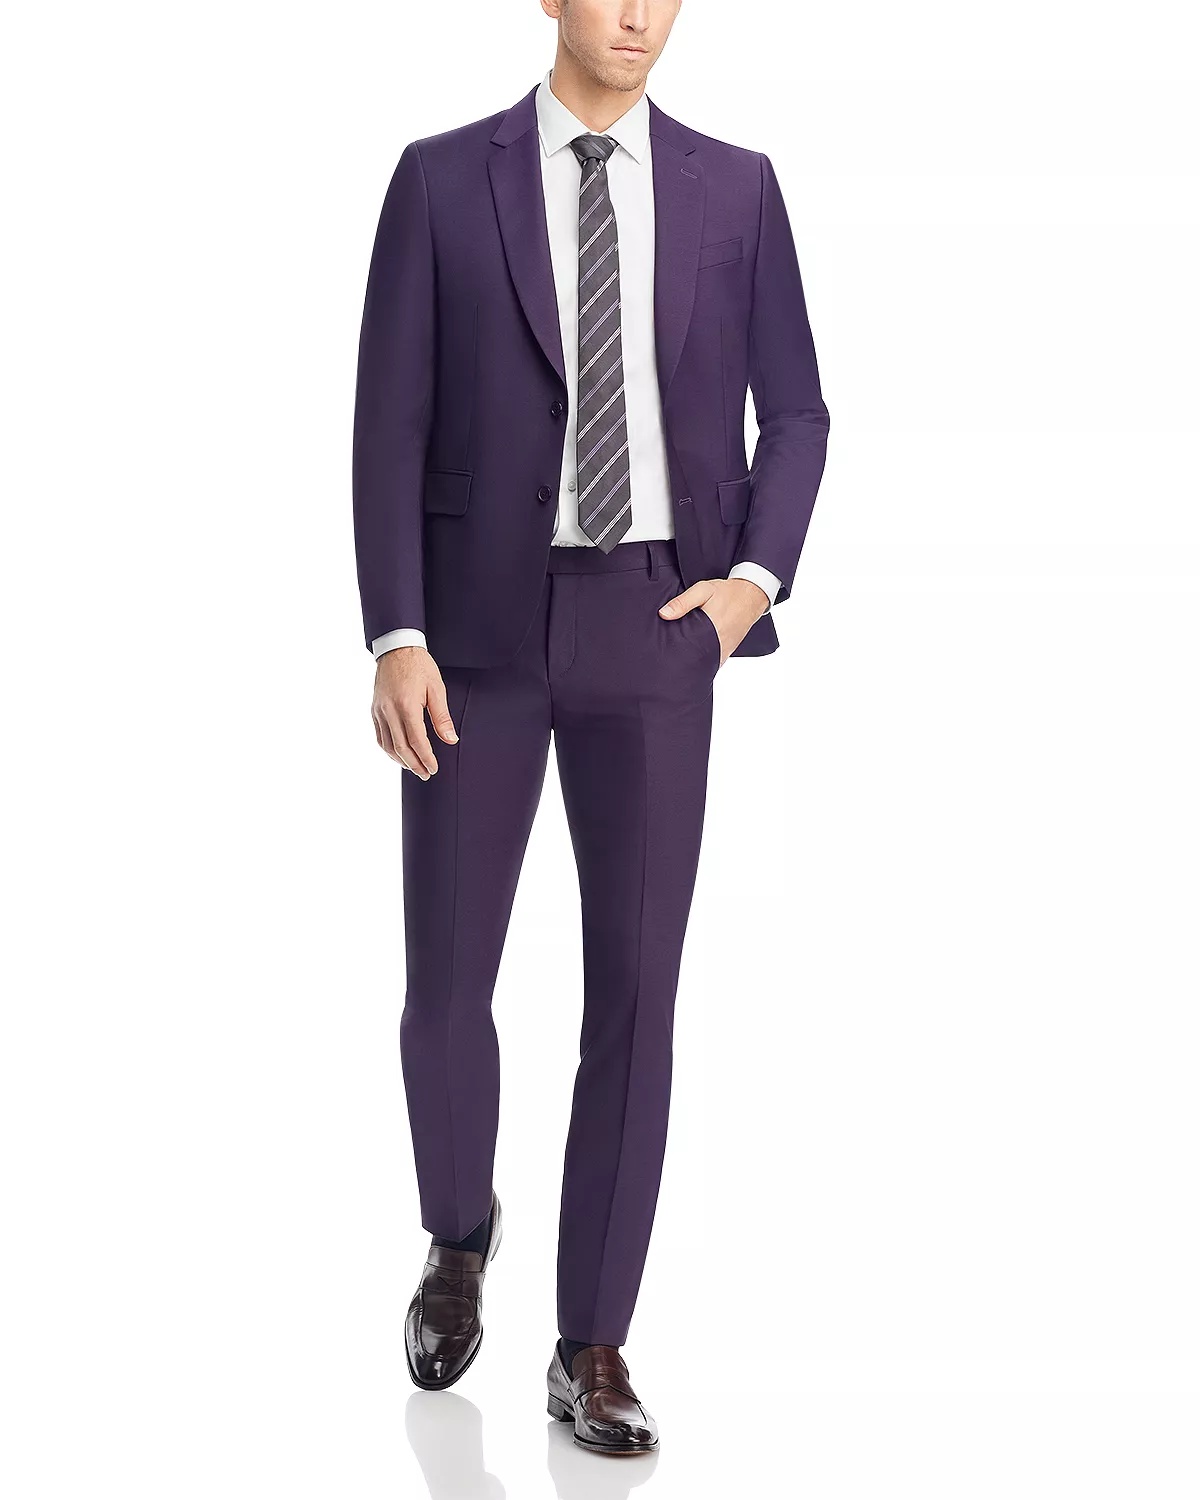 Soho Wool & Mohair Extra Slim Fit Suit - 3